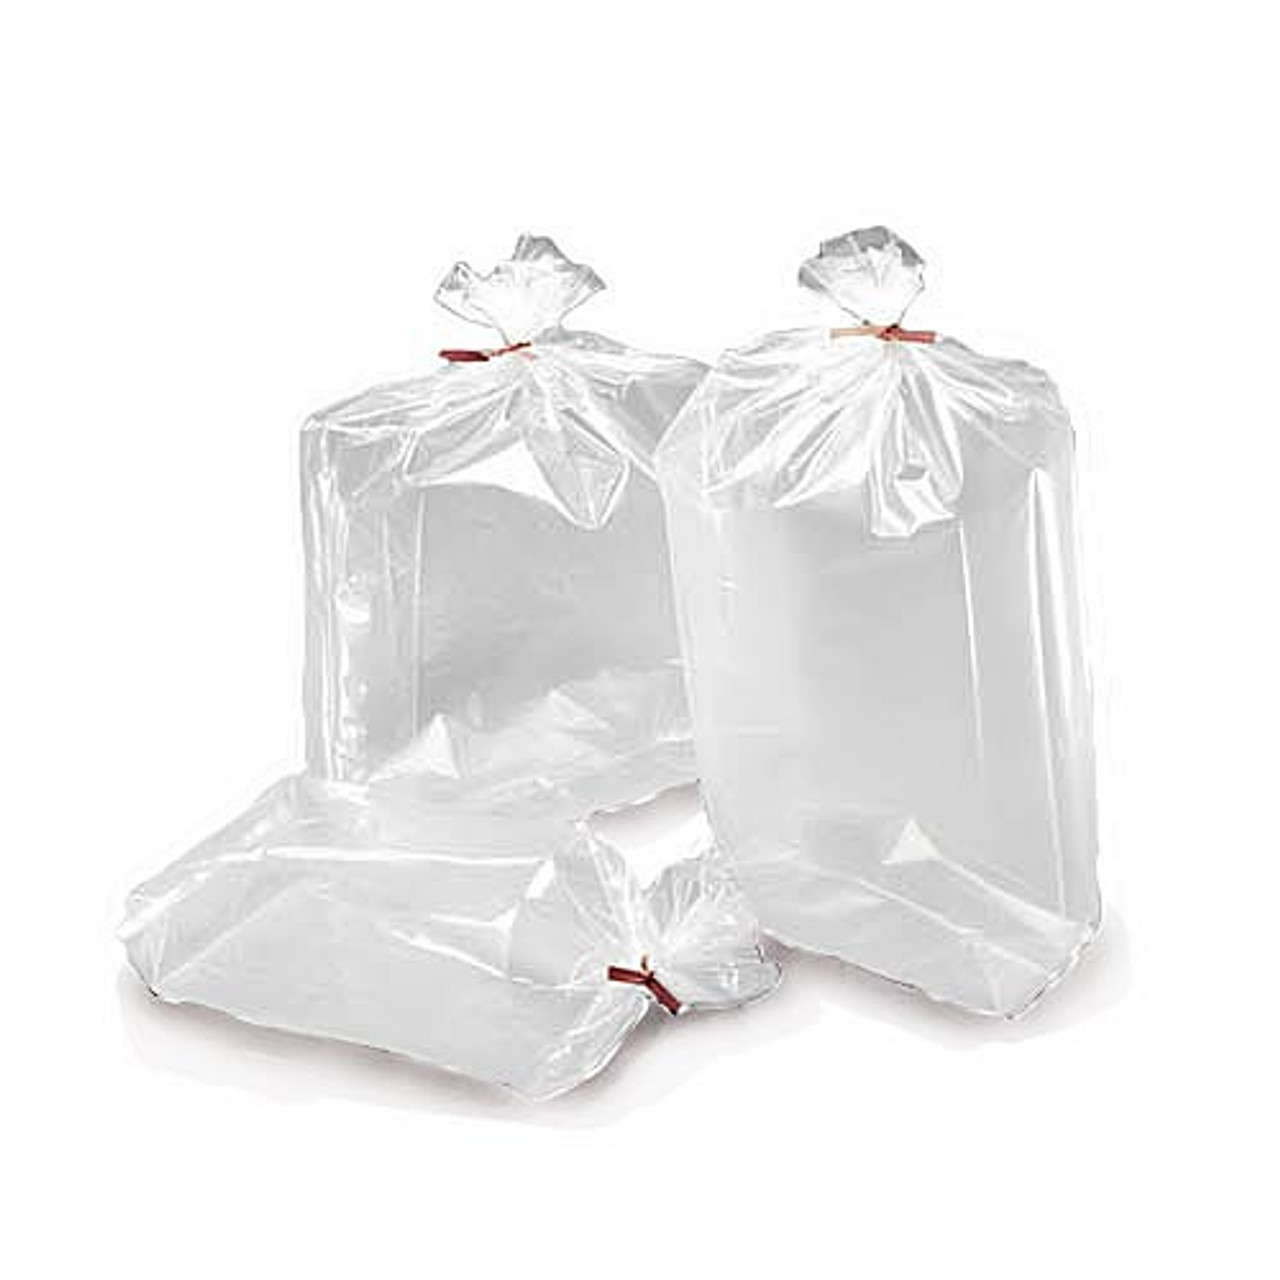 purosafe 8 X 12 8X12 Polybag 8X12 Inch Pack of 100 PCS, Temper Proof with  Document Pouch POD Courier Bags/Envelopes/Pouches/Cover Polybags for  Shipping/Packing/Mailing/Cards and Other Packing Poly Bags (Milky White) 8 X